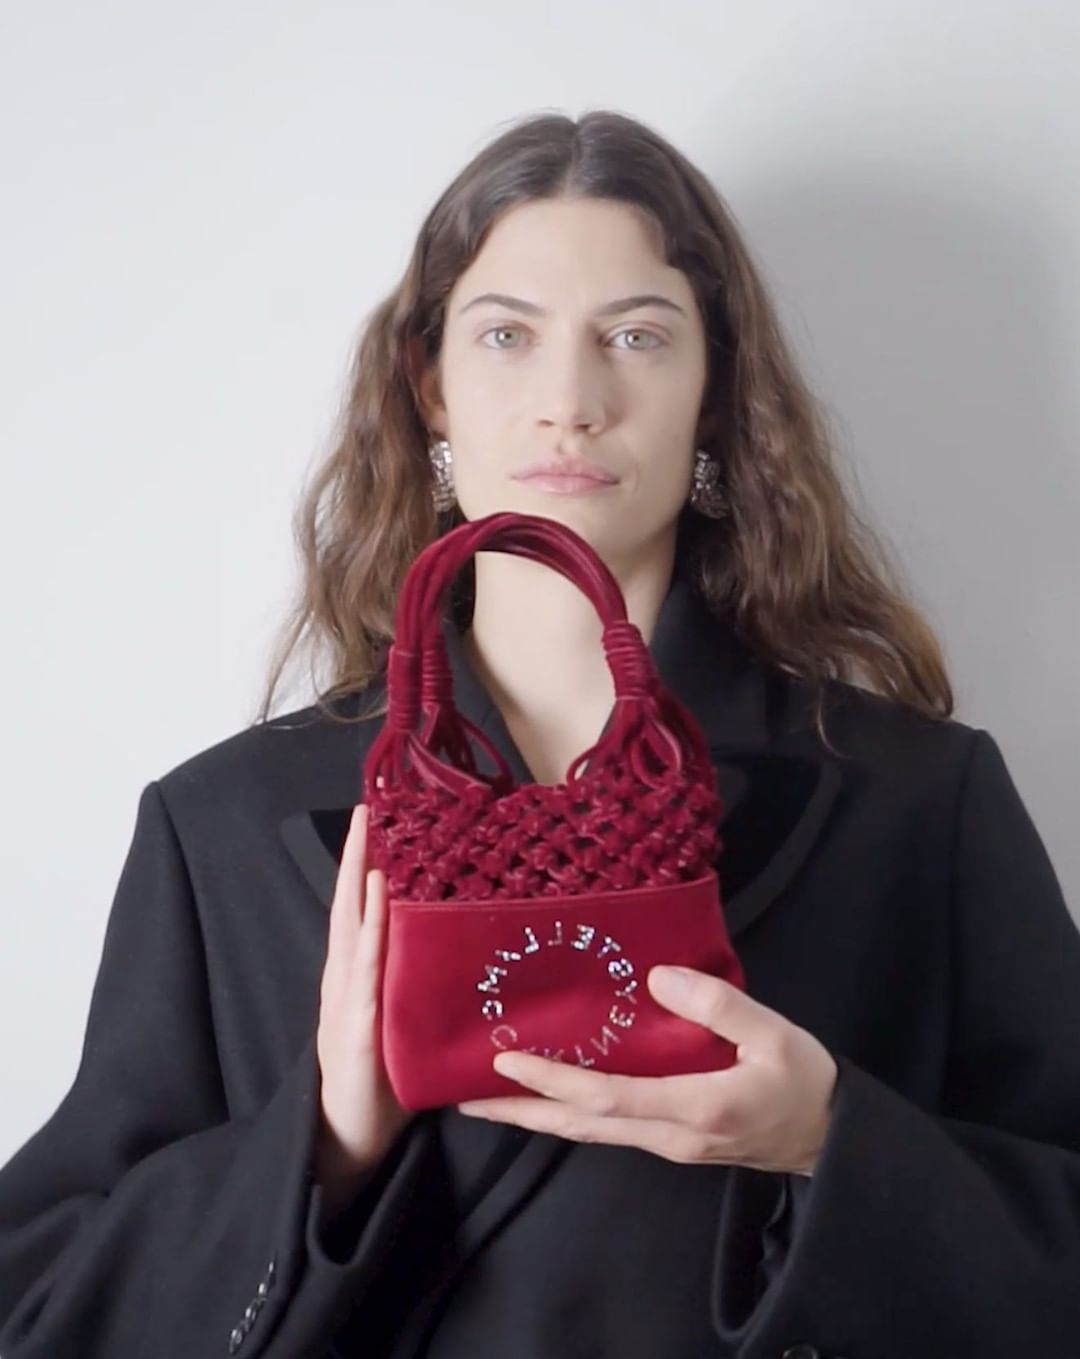 Stella McCartney - Vegan is not a term we throw around lightly. All of our Autumn 2020 bags have been consciously created with our innovative, cruelty-free alternative – infinitely desirable and indis...